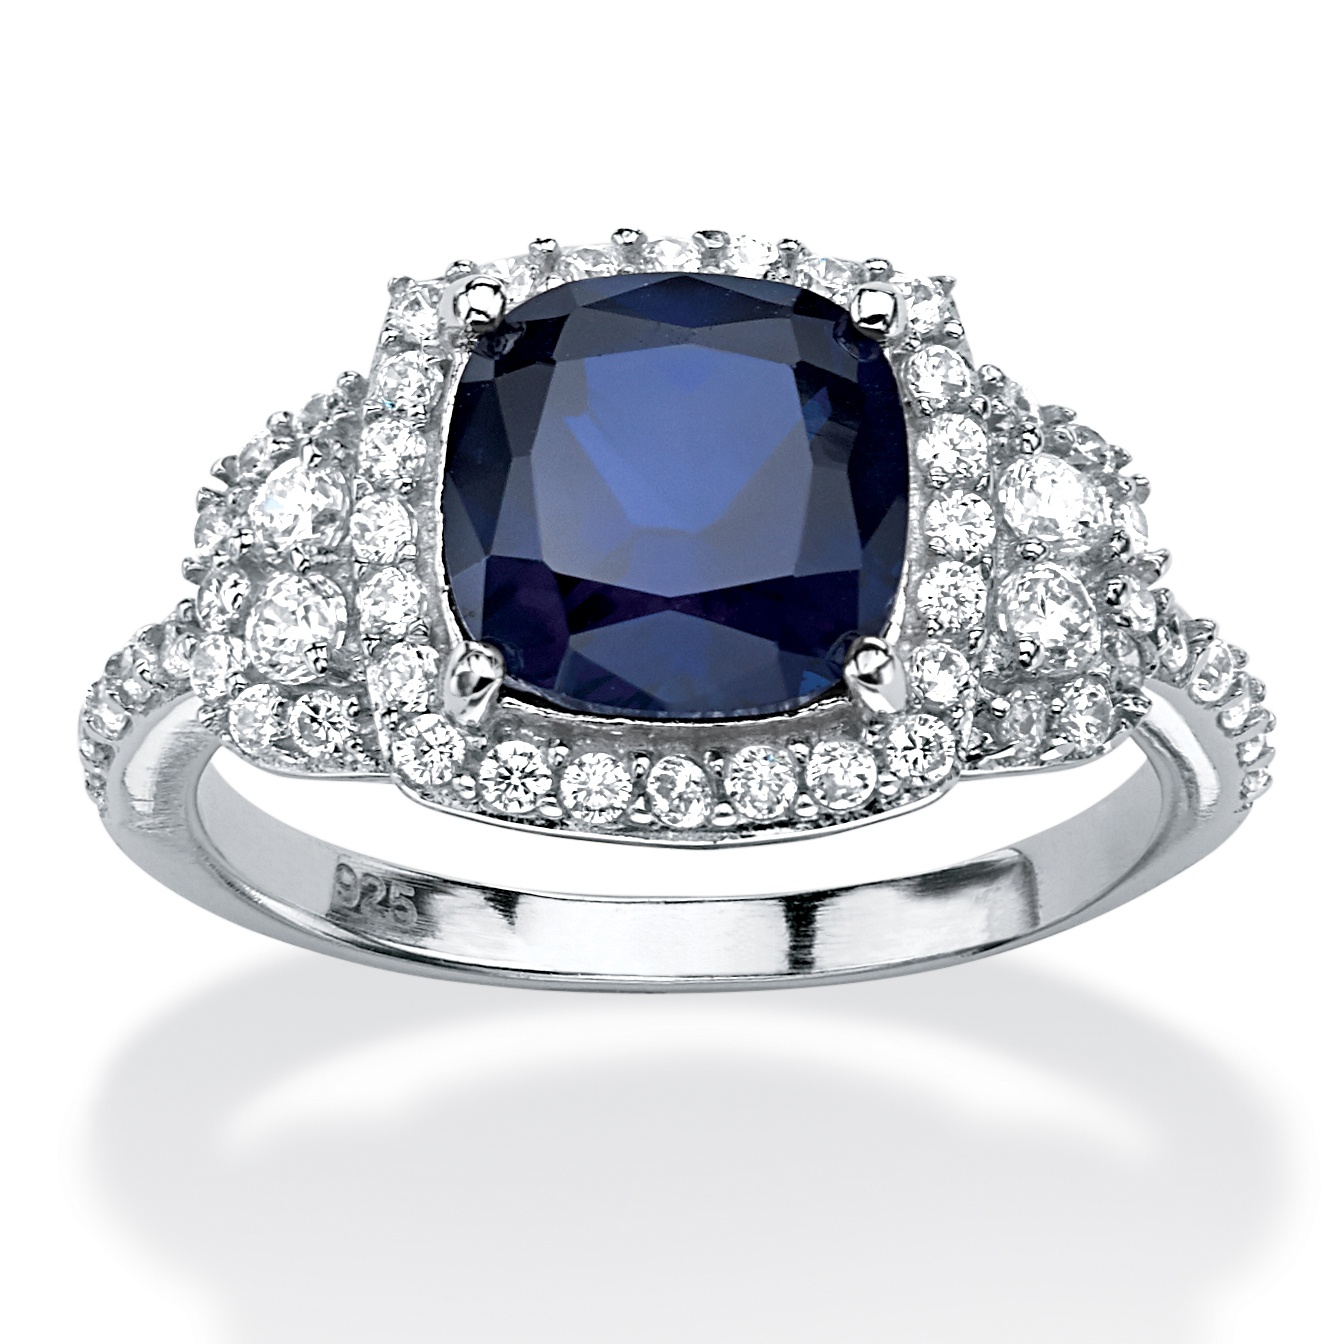 1.36 TCW Cushion-Cut Sapphire Halo Ring in Platinum over Sterling ...